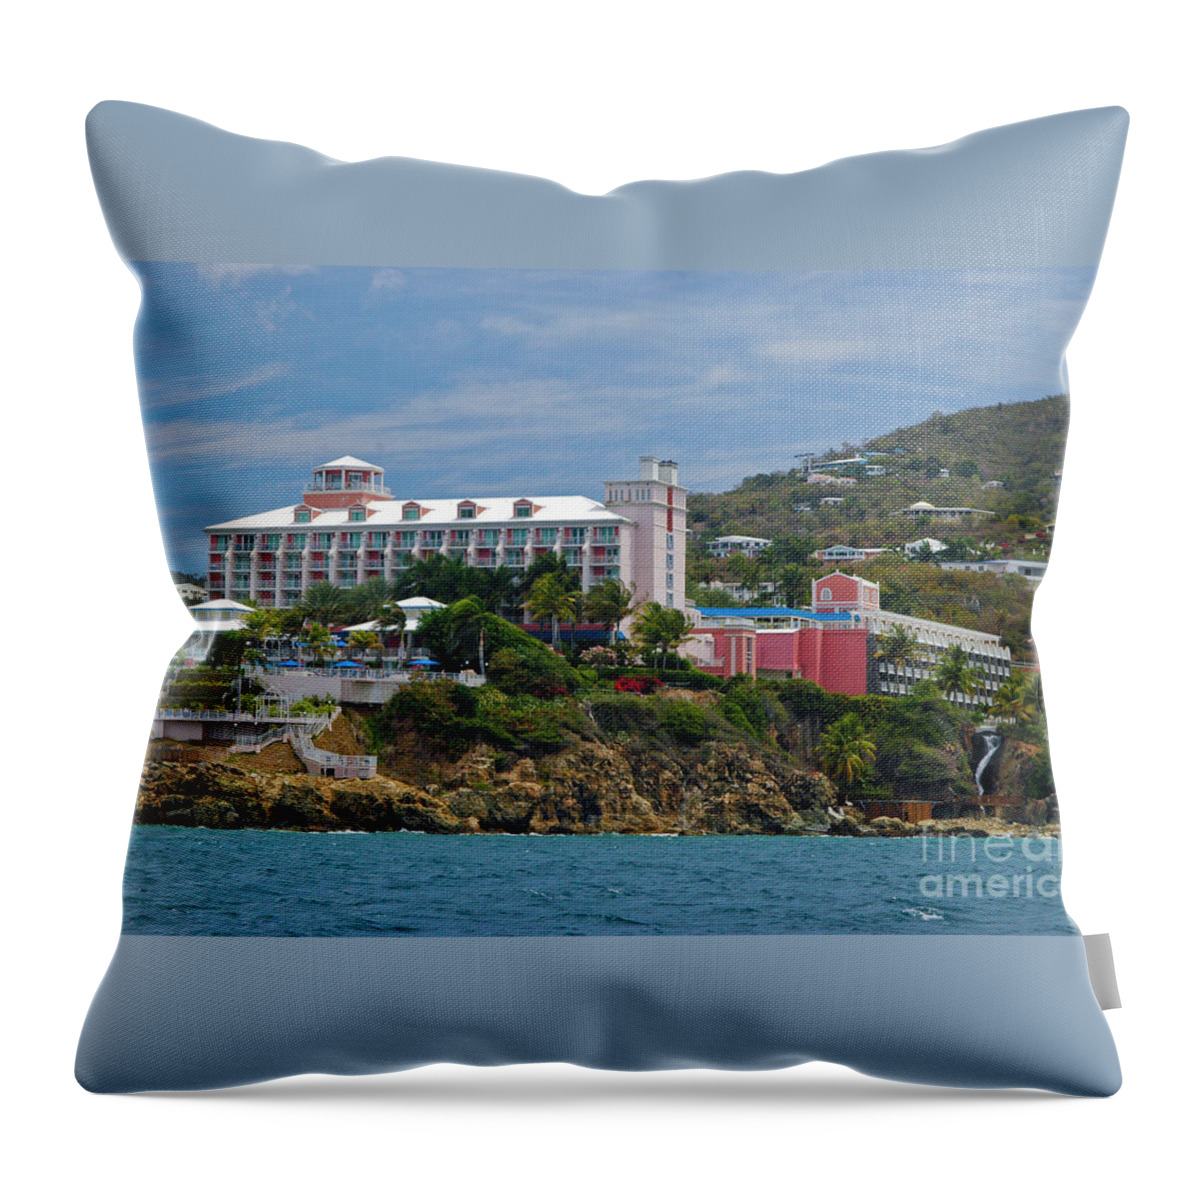 St. Thomas Throw Pillow featuring the photograph Frenchman's Reef Resort 3 by Tim Mulina